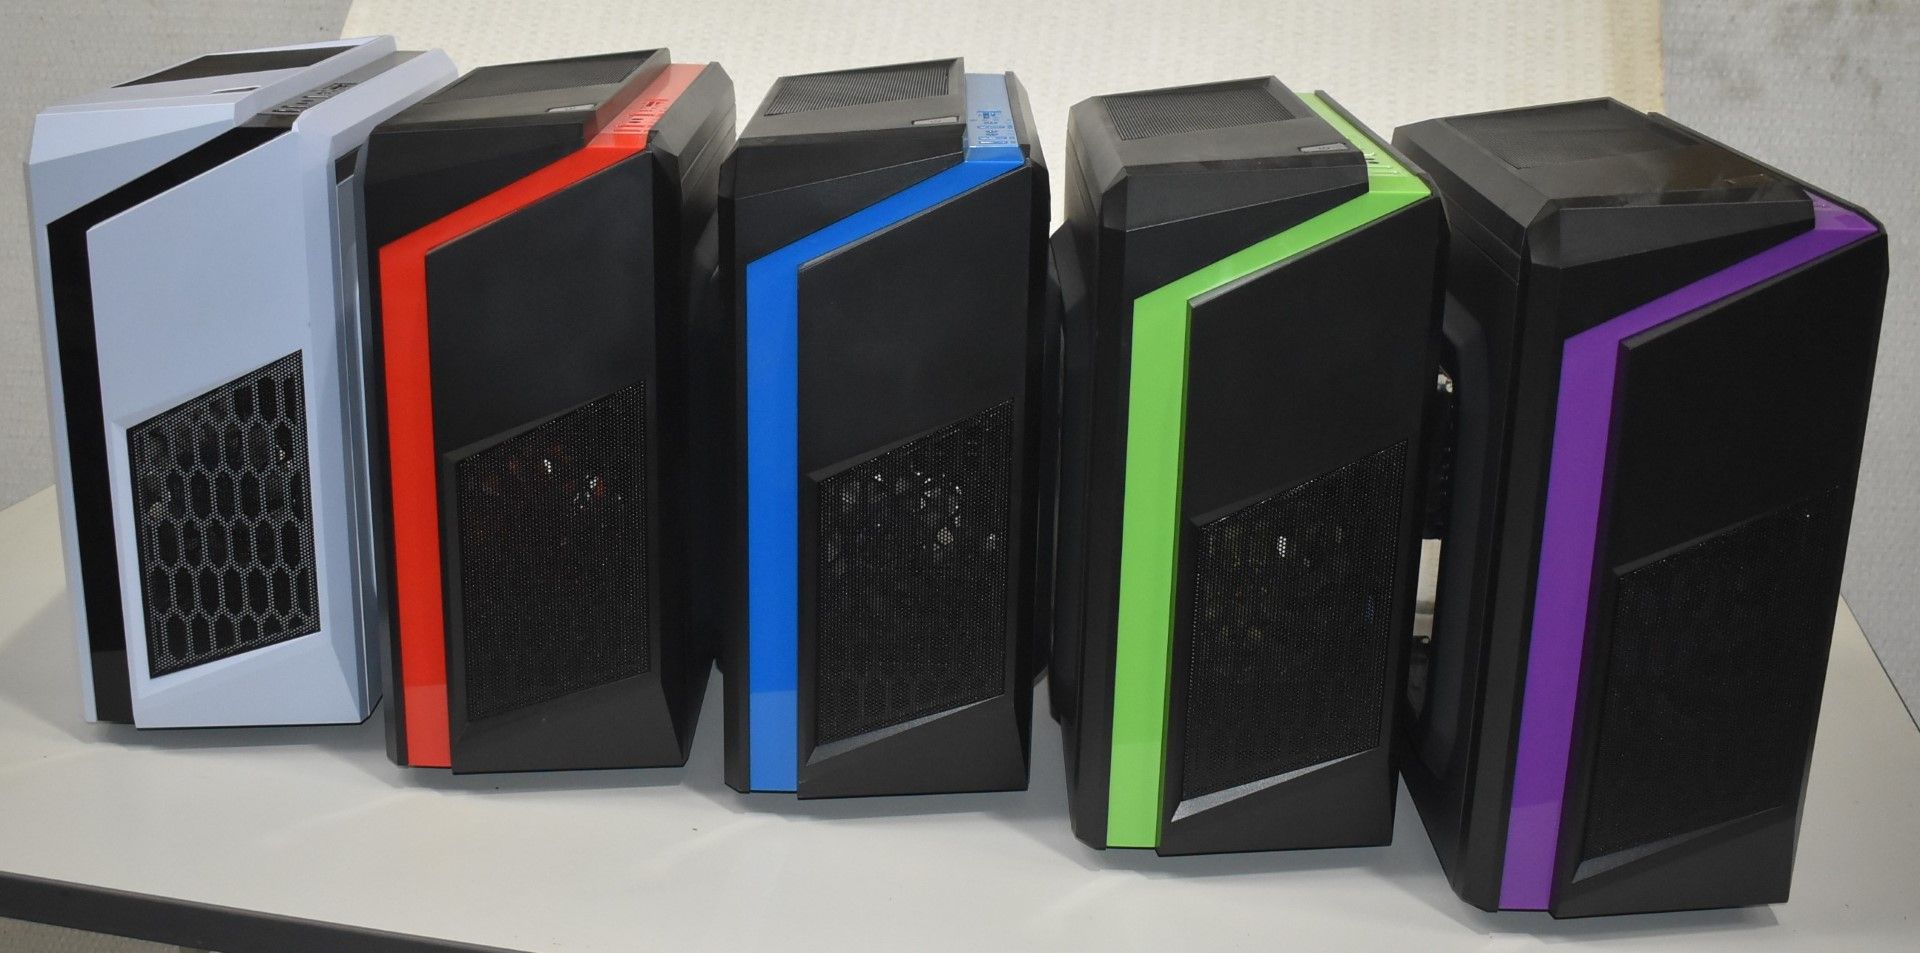 5 x ATX Computer Cases With USB 3.0, SD Card Readers, Side Window and Case Fan